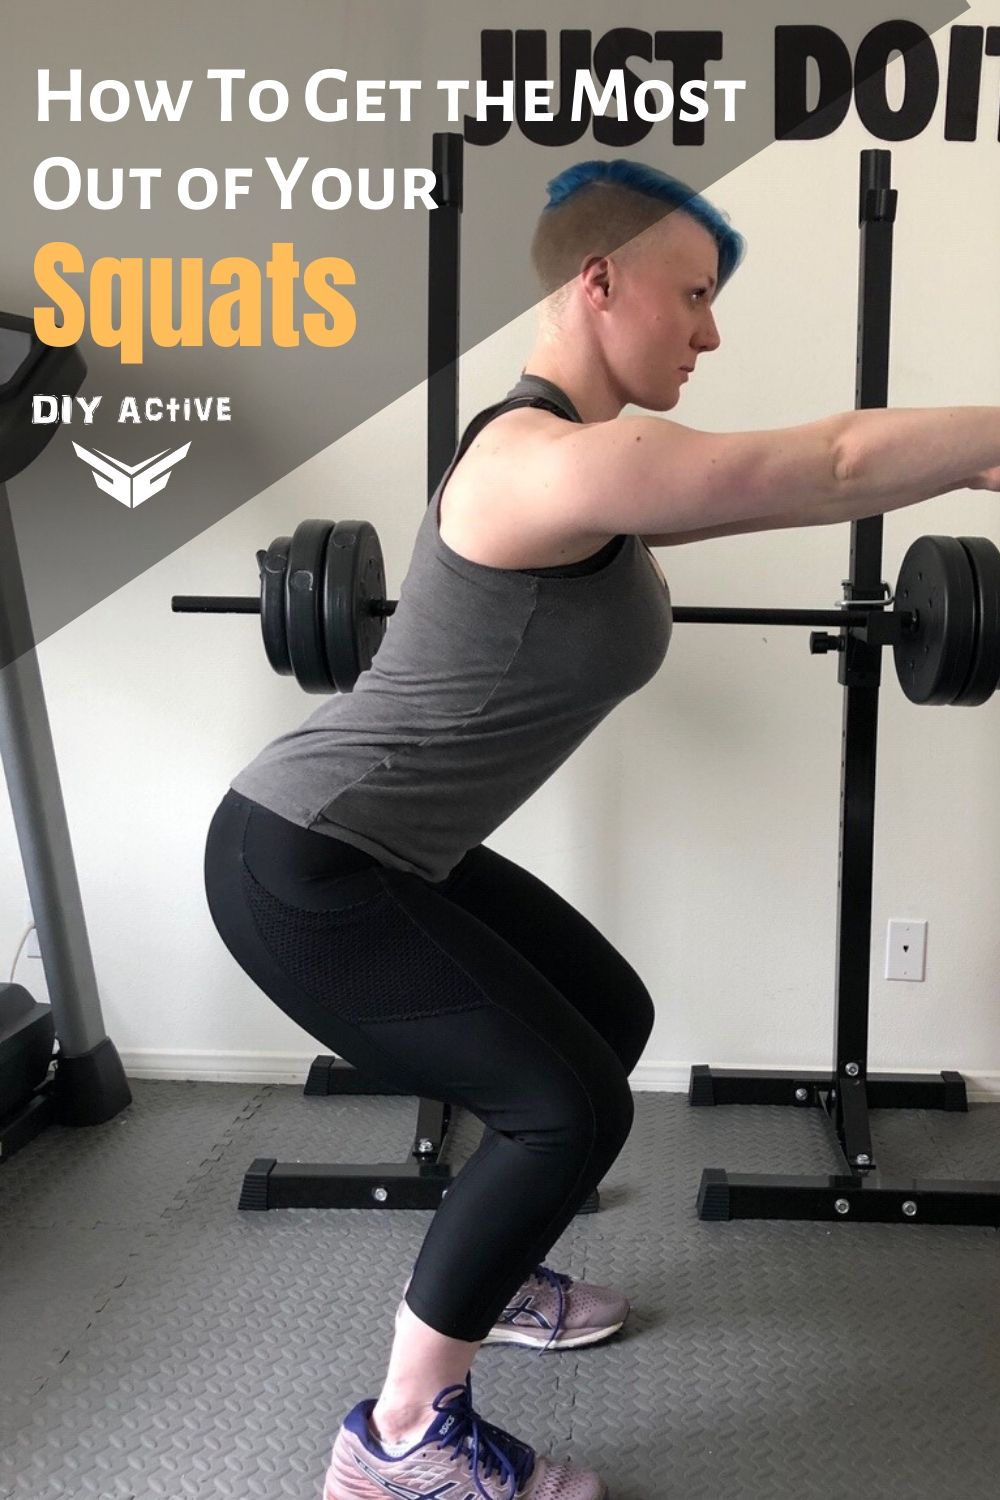 How To Do Squats Correctly